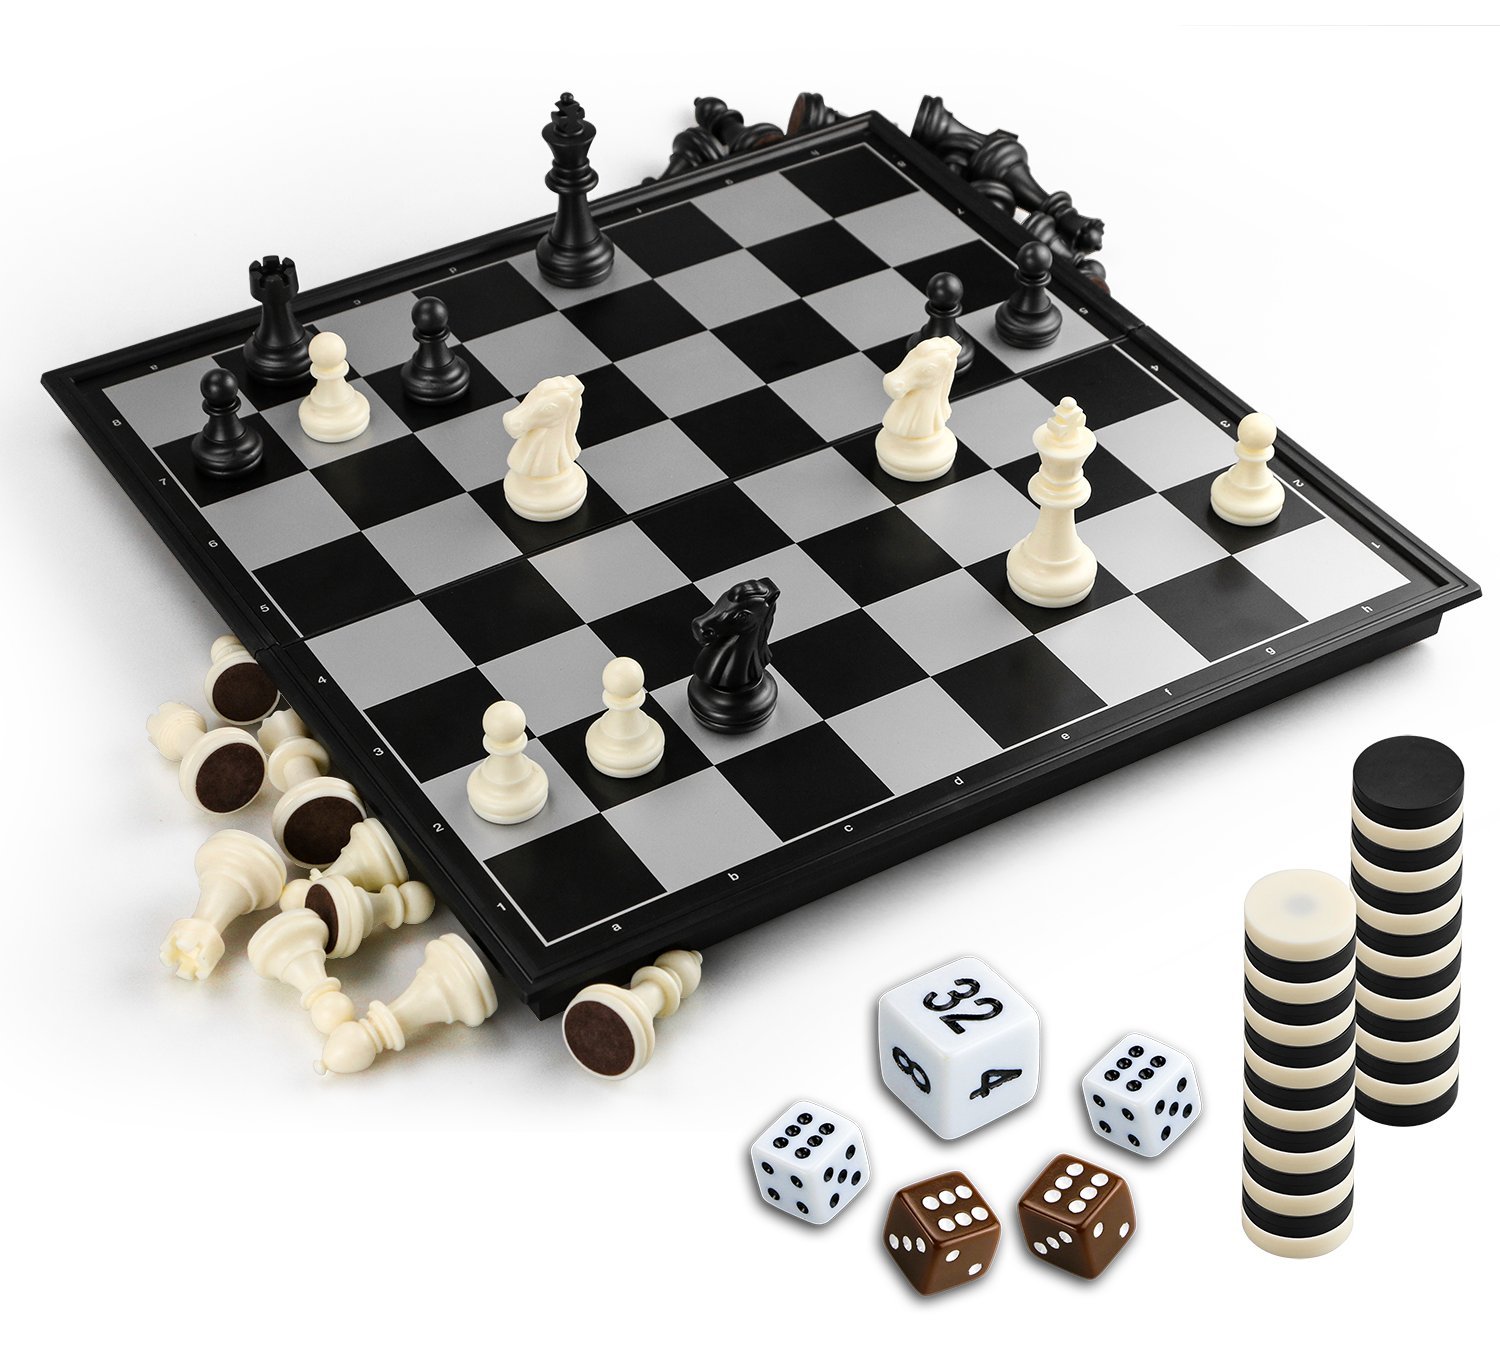 Black Travel Game Gibot 3-in-1 Magnetic Chess Game Educational Game for Kids 